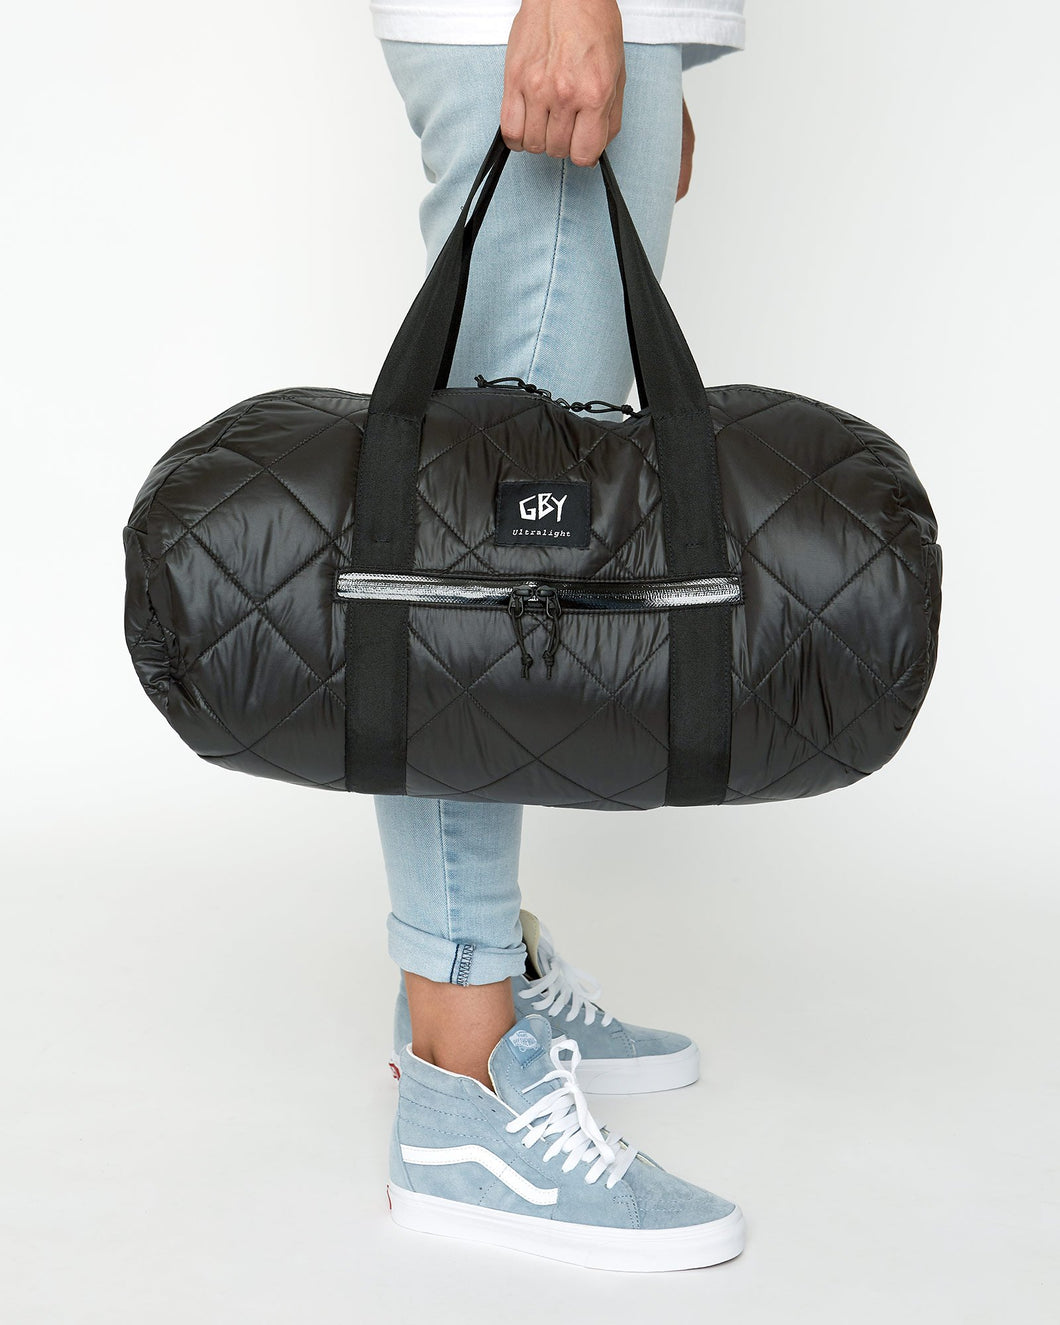 color: black ~ alt: GBY Ultralight - Quilted Gym Duffel Bag ~ model_h: 5'9